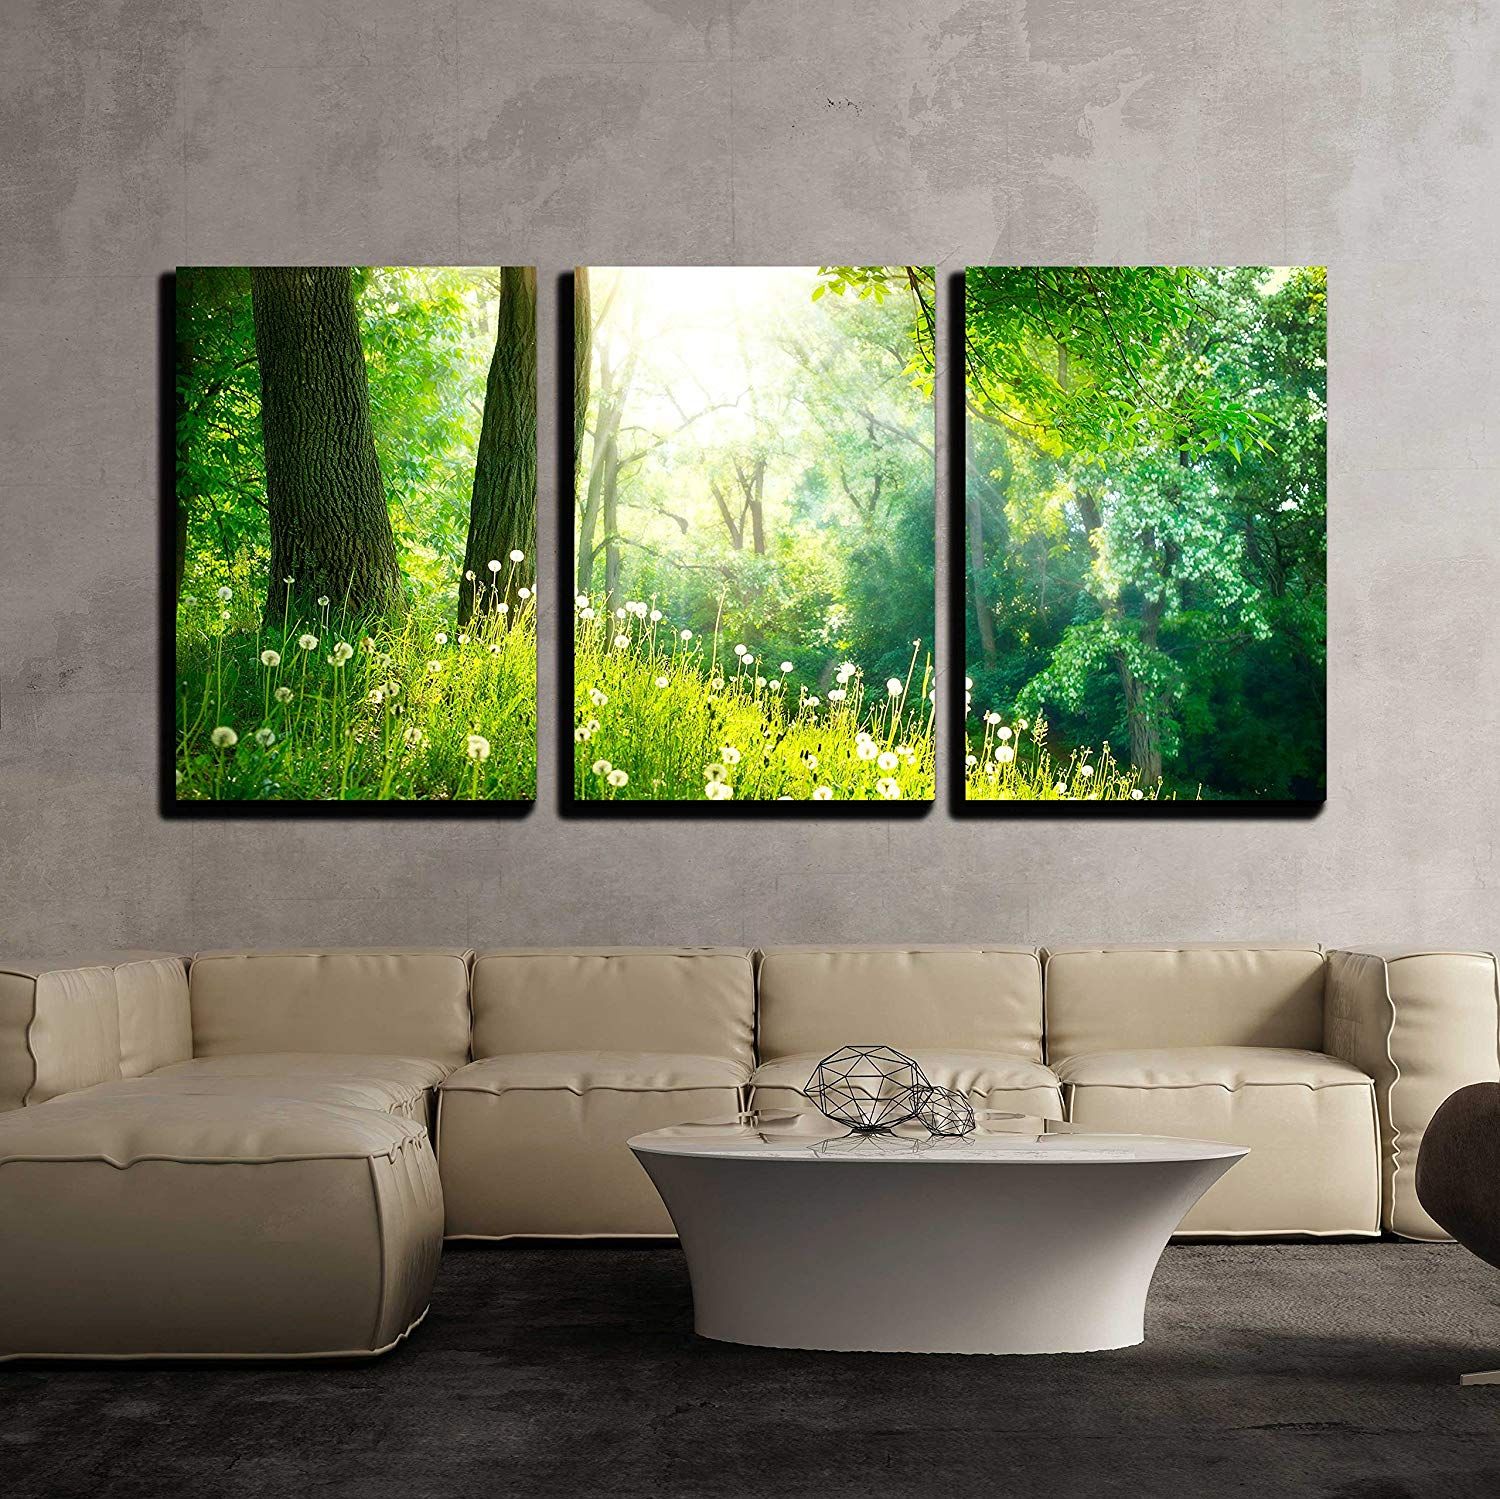 Wall26 3 Piece Canvas Wall Art – Spring Nature Beautiful For Most Current Natural Framed Art Prints (View 5 of 20)